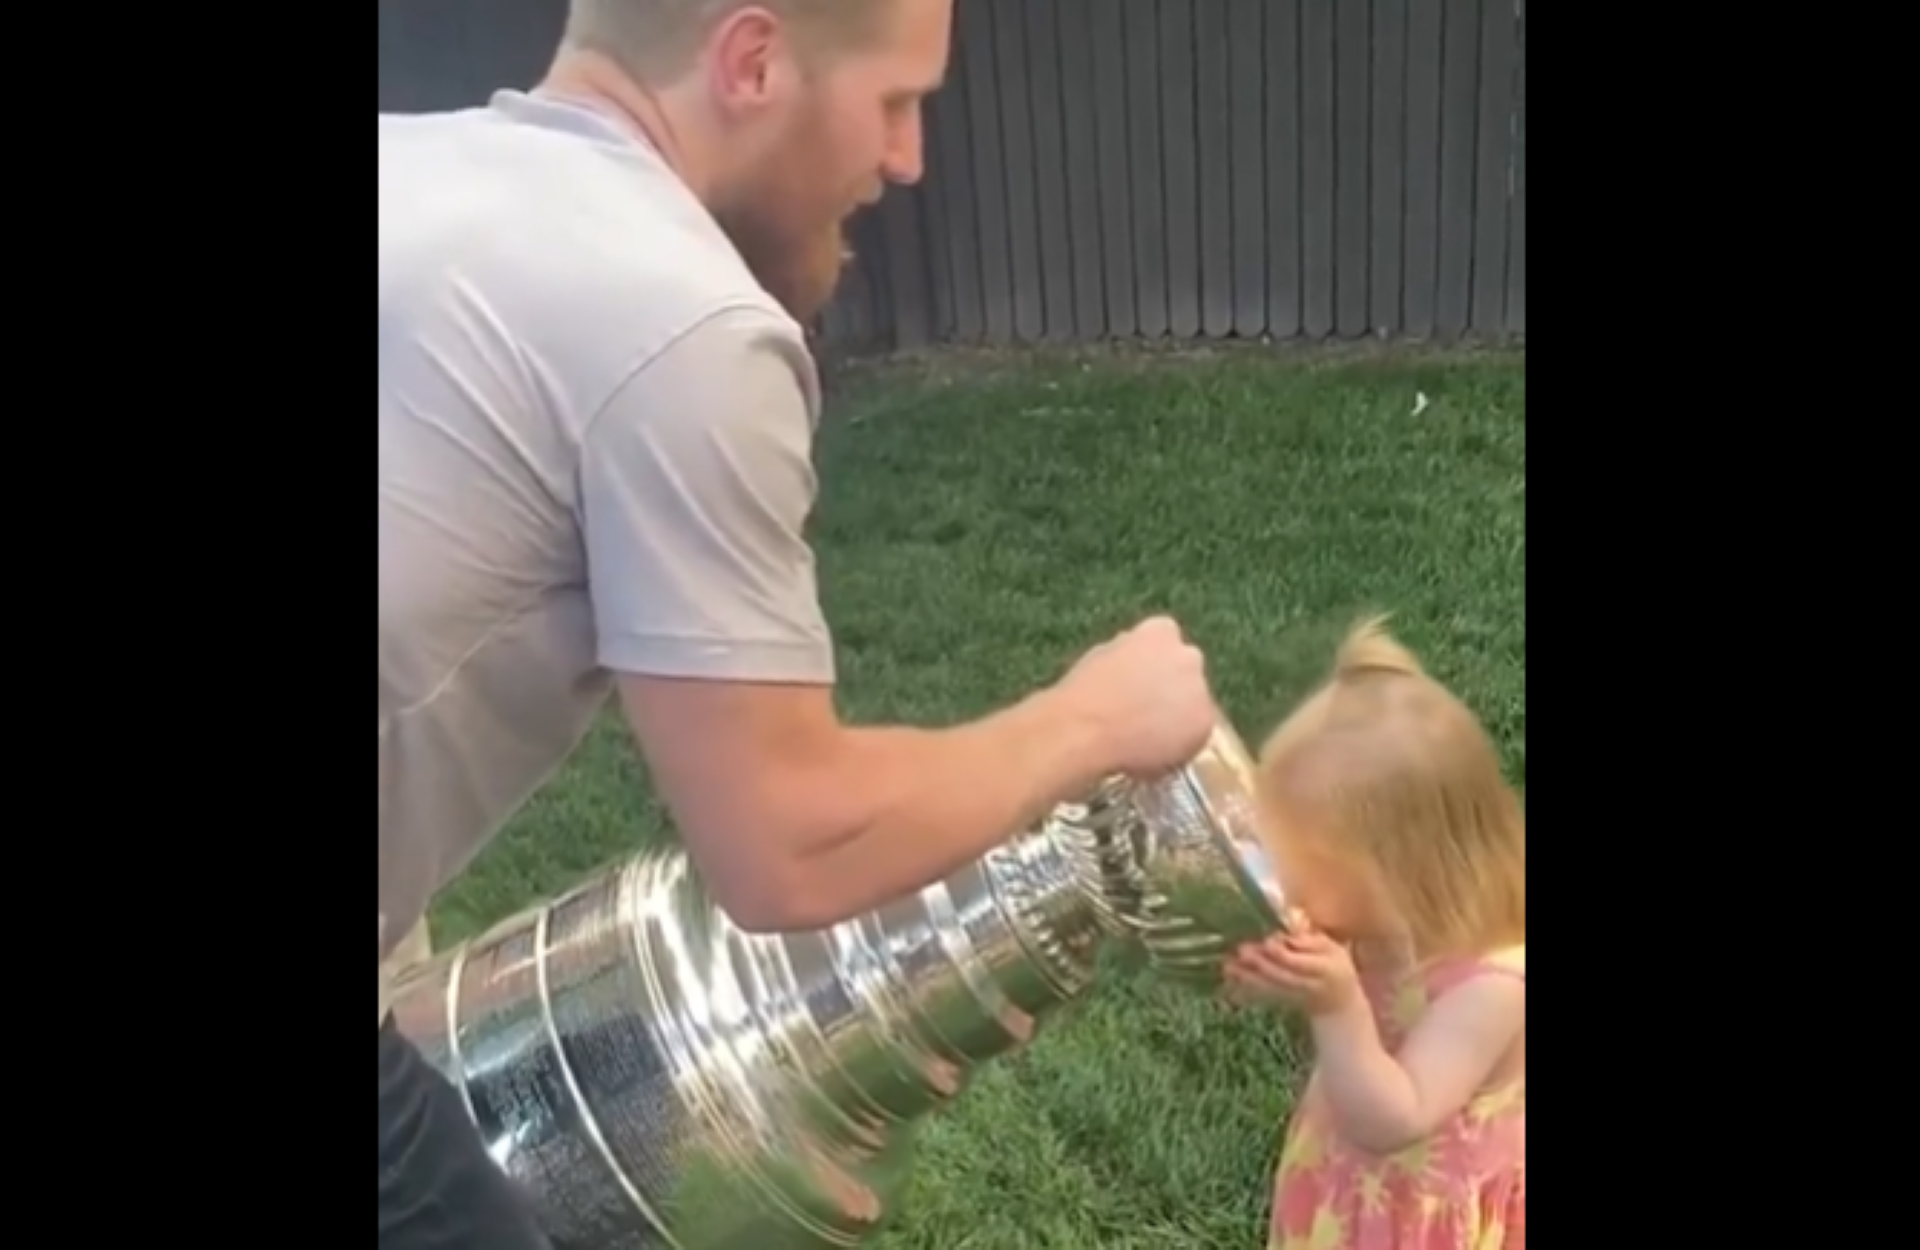 What's Hot: 2-year-old drinks from Stanley Cup